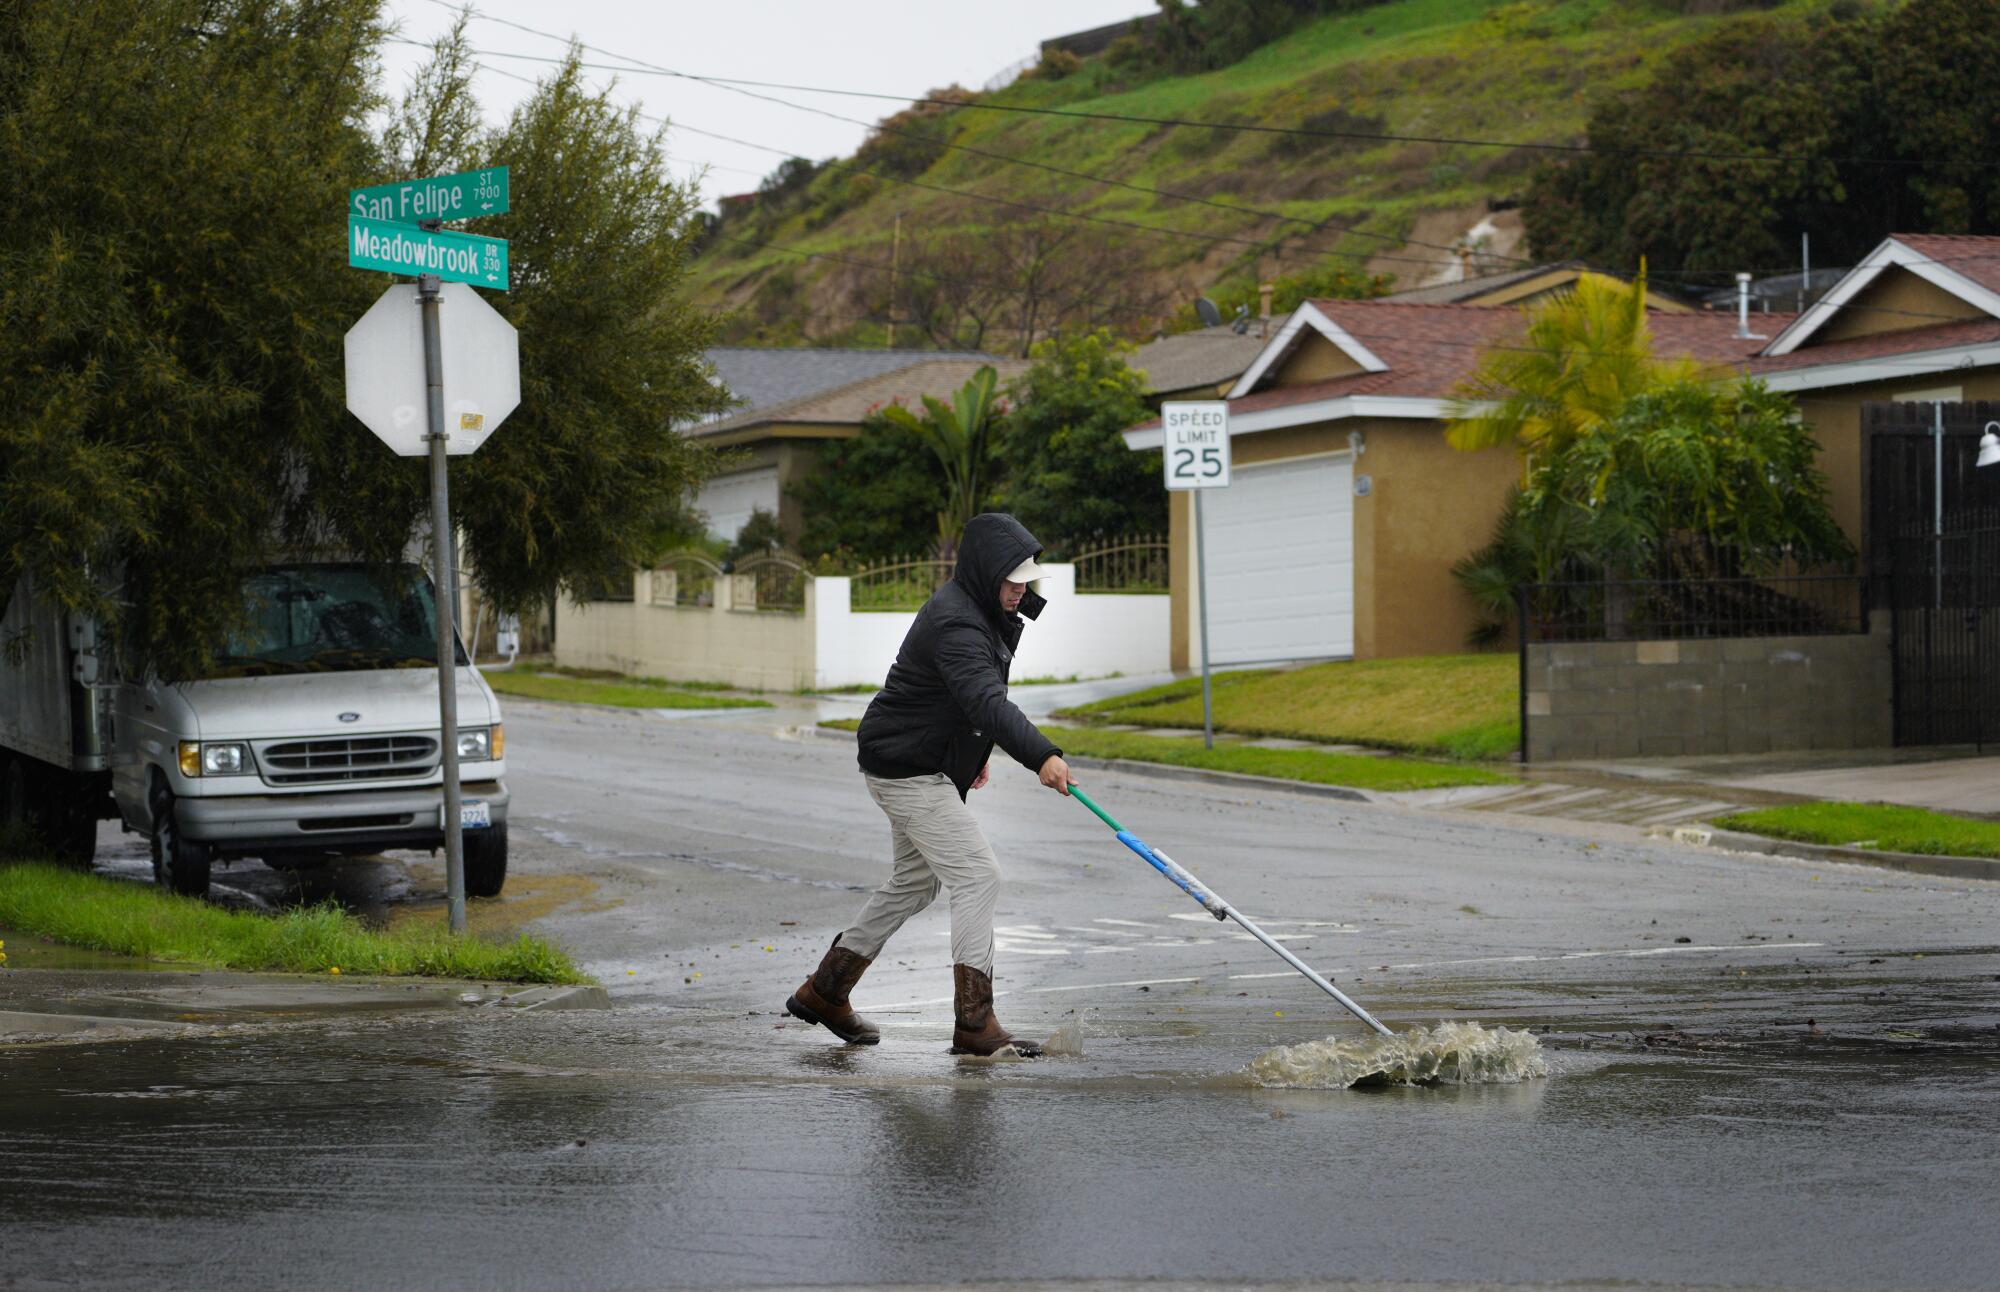 One man used a broom to help drain excess water.